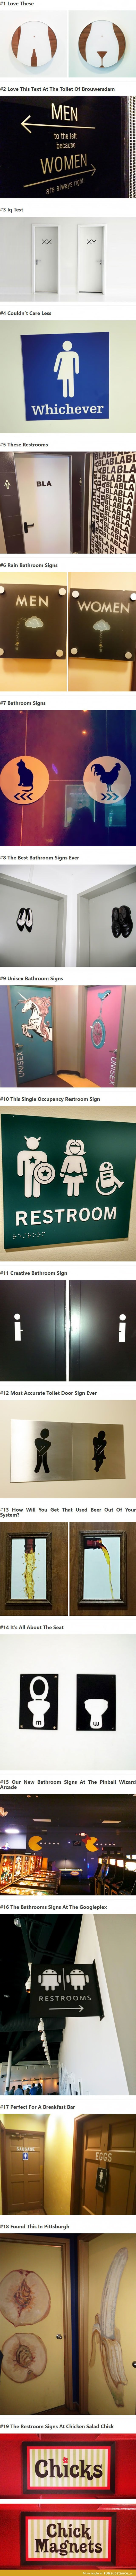 19 Times Bathroom Signs Get Really Creative